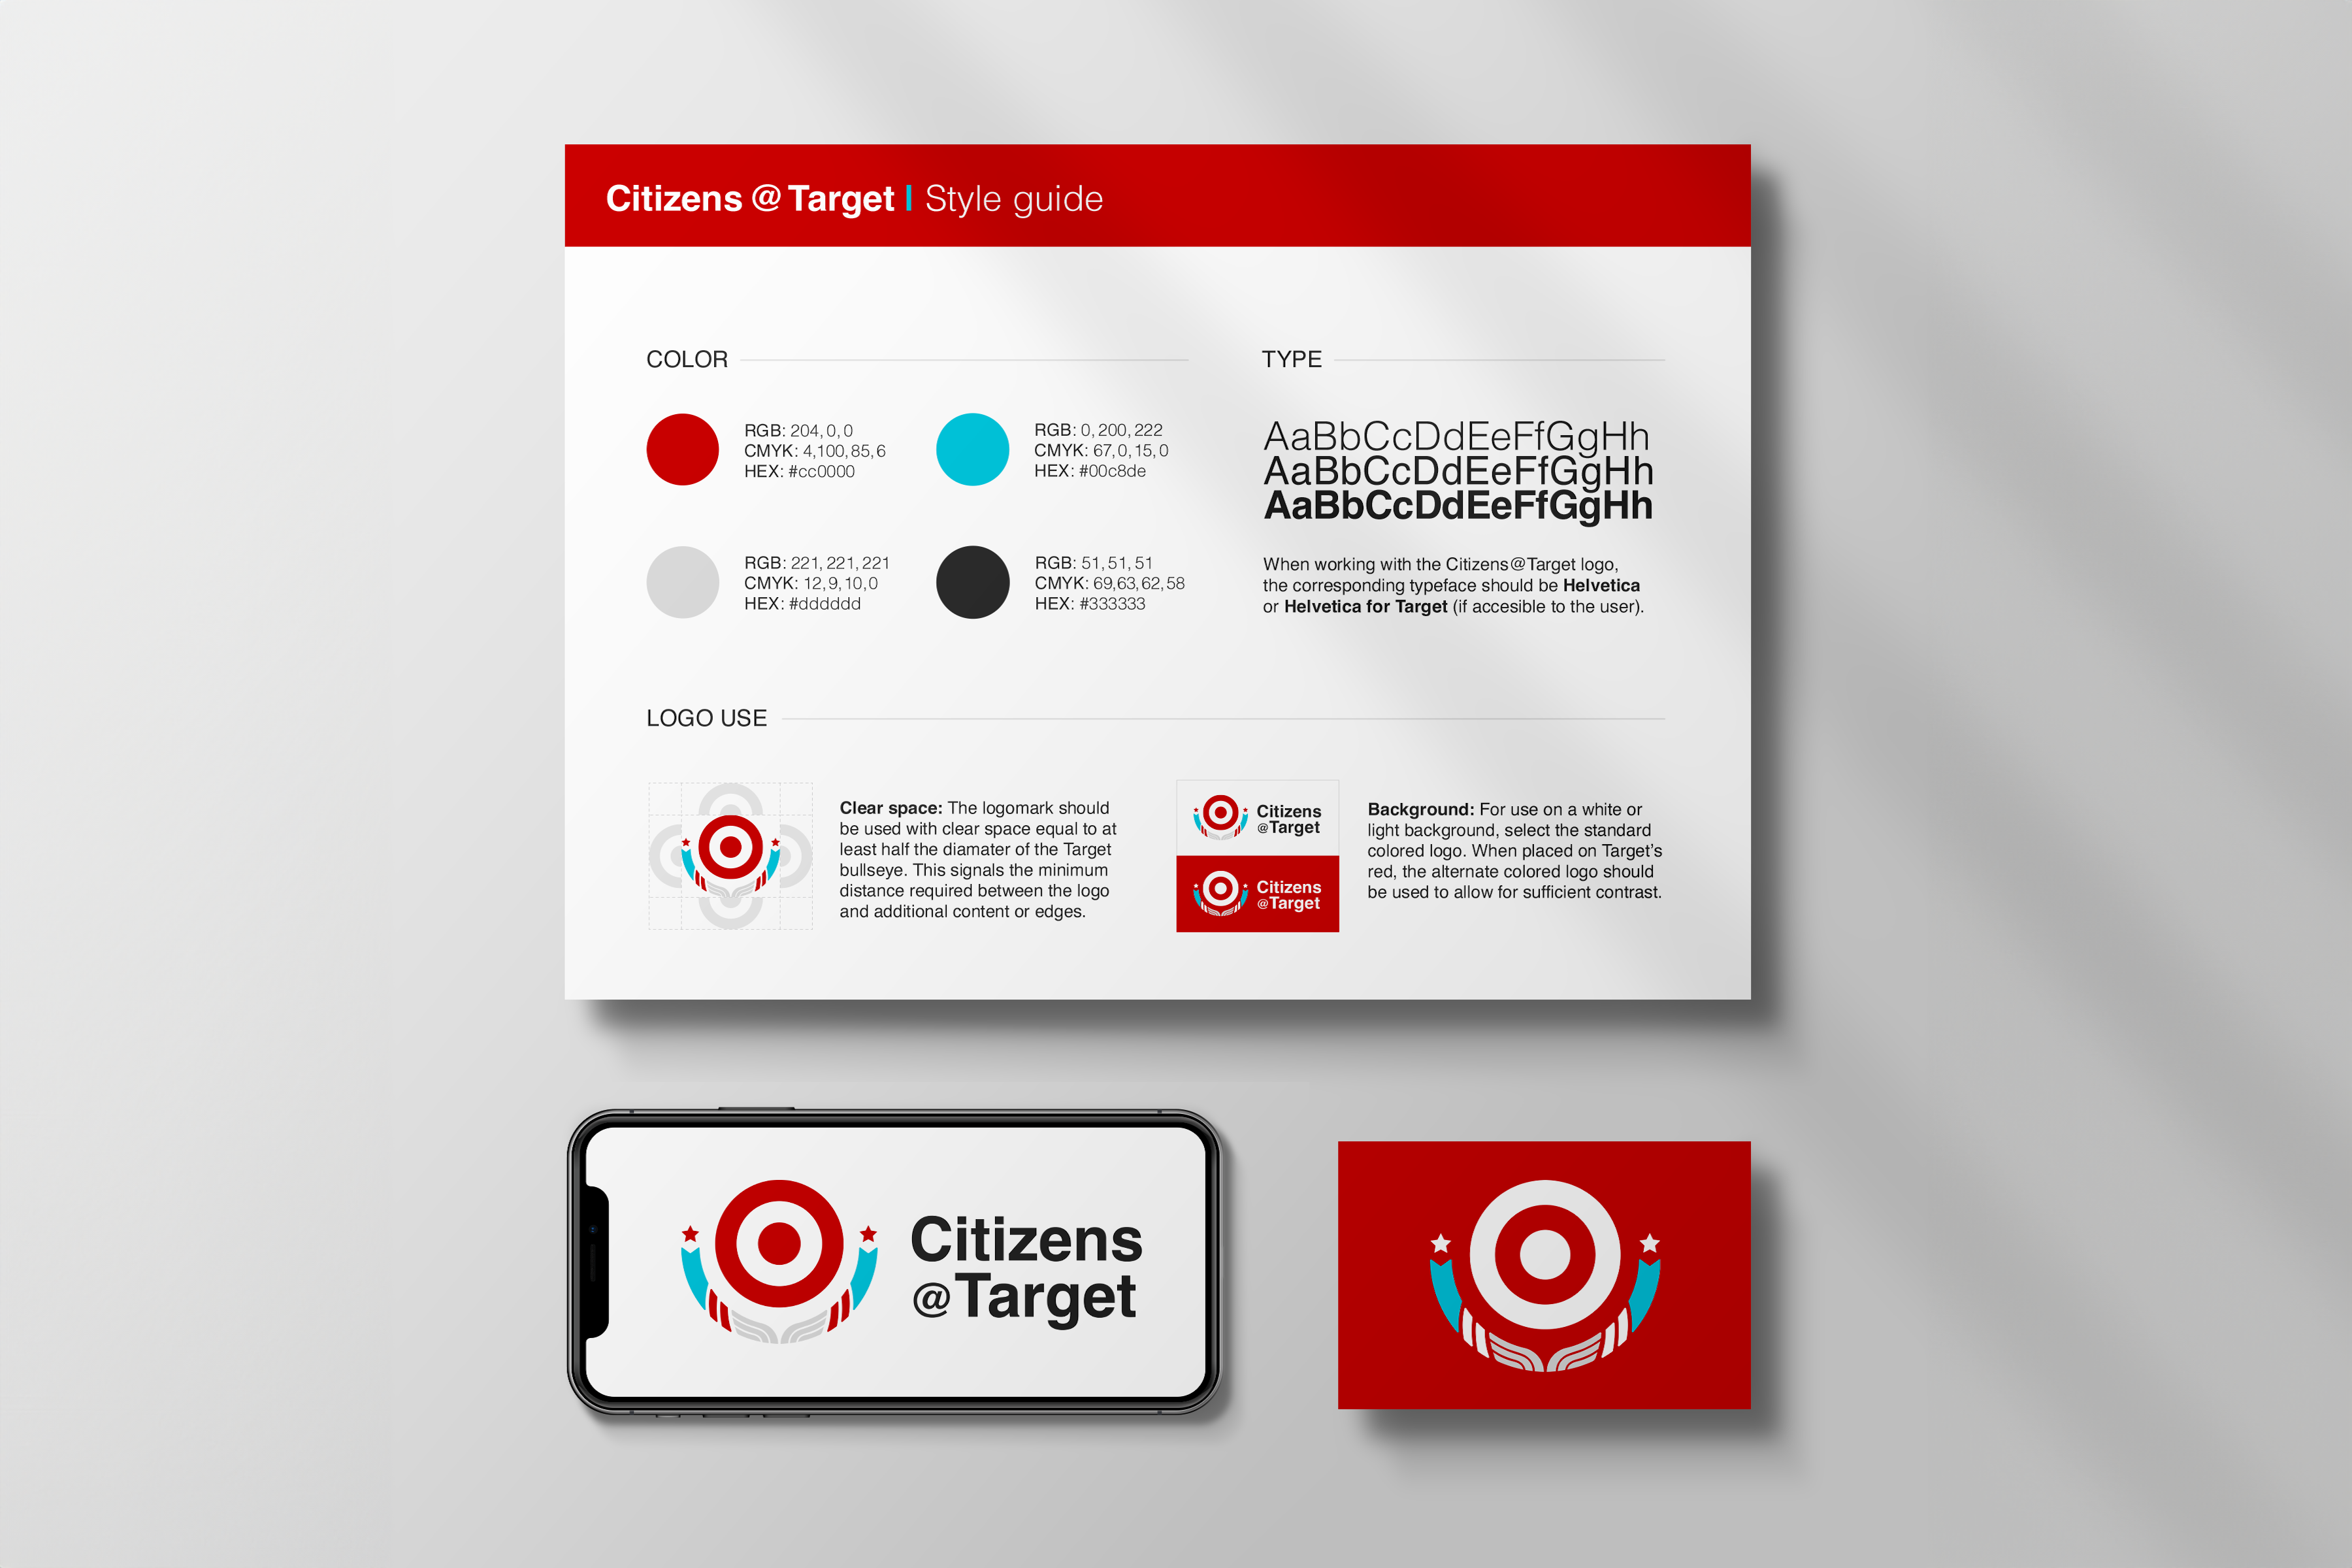 Citizens@Target style guide depicting colors, fonts and directions for logo usage